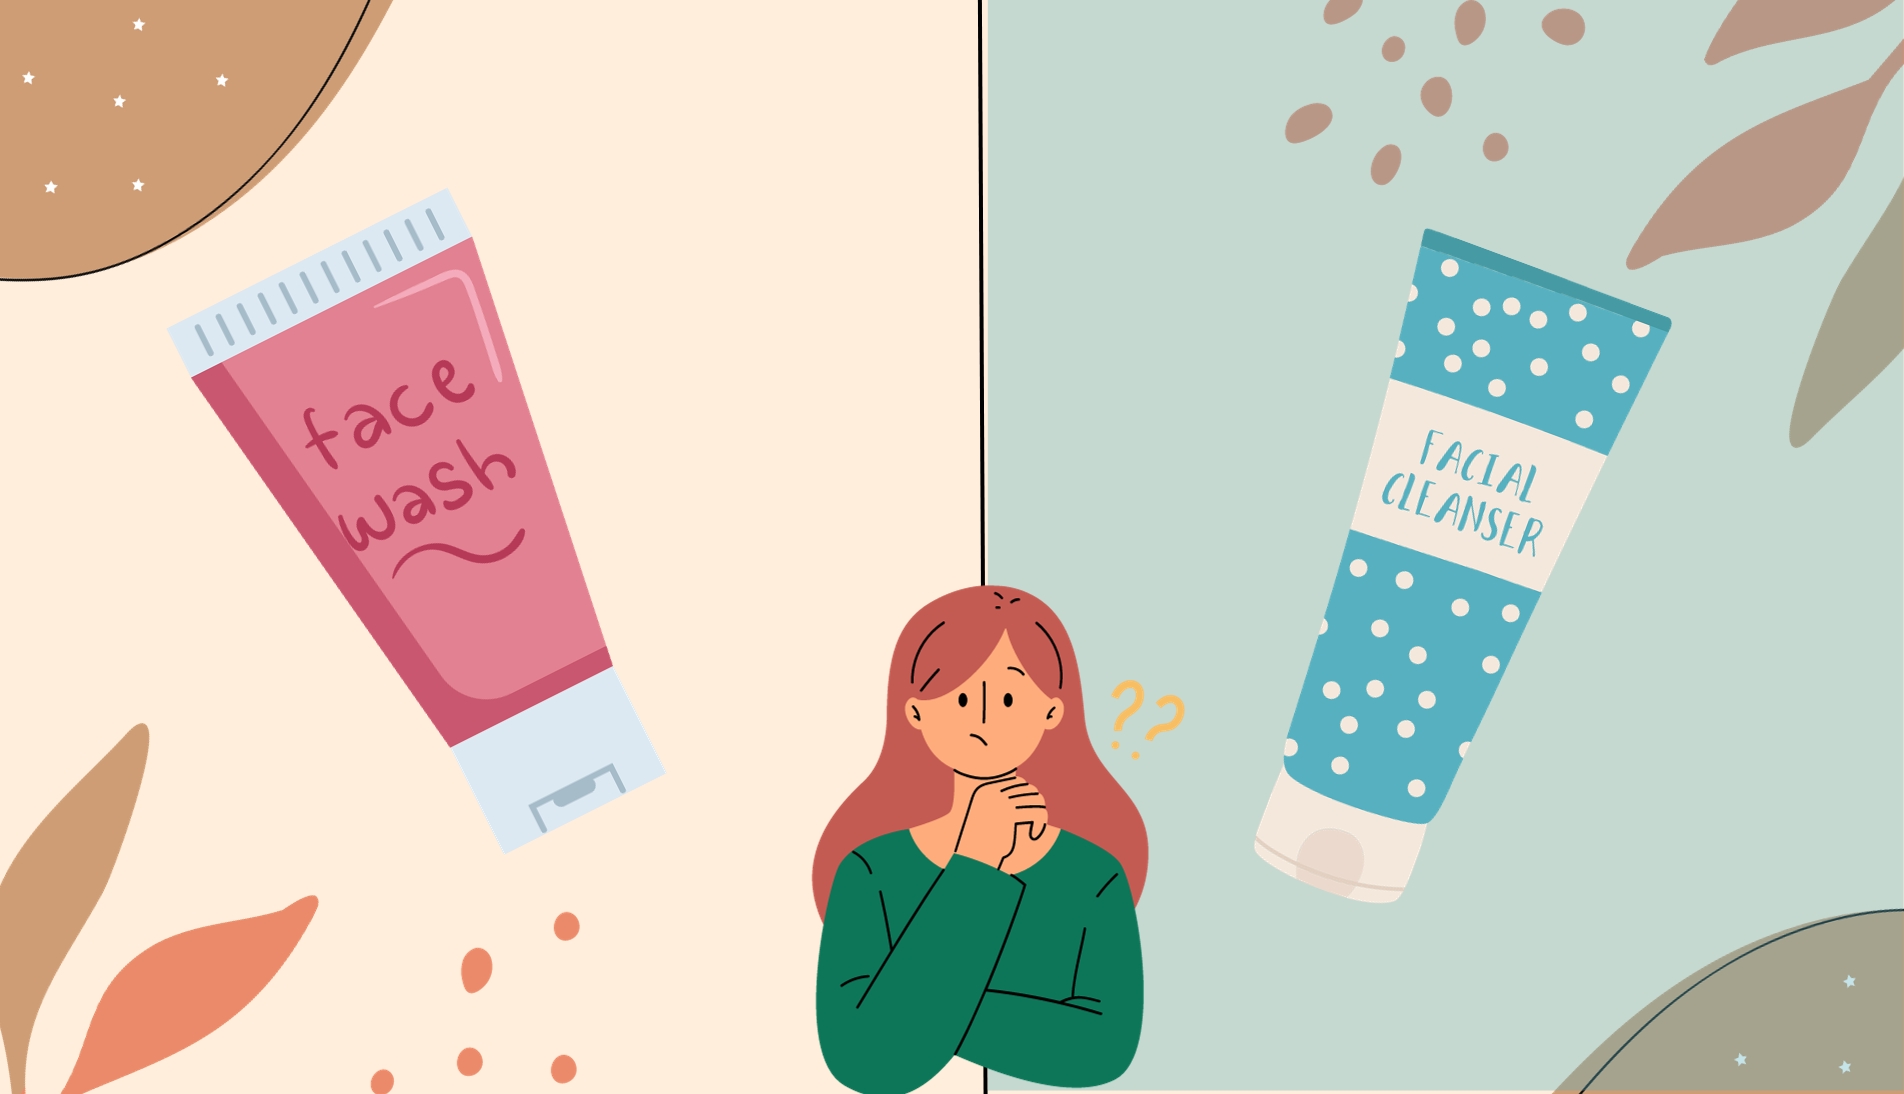 Illustration of various face wash and facial cleanser products.